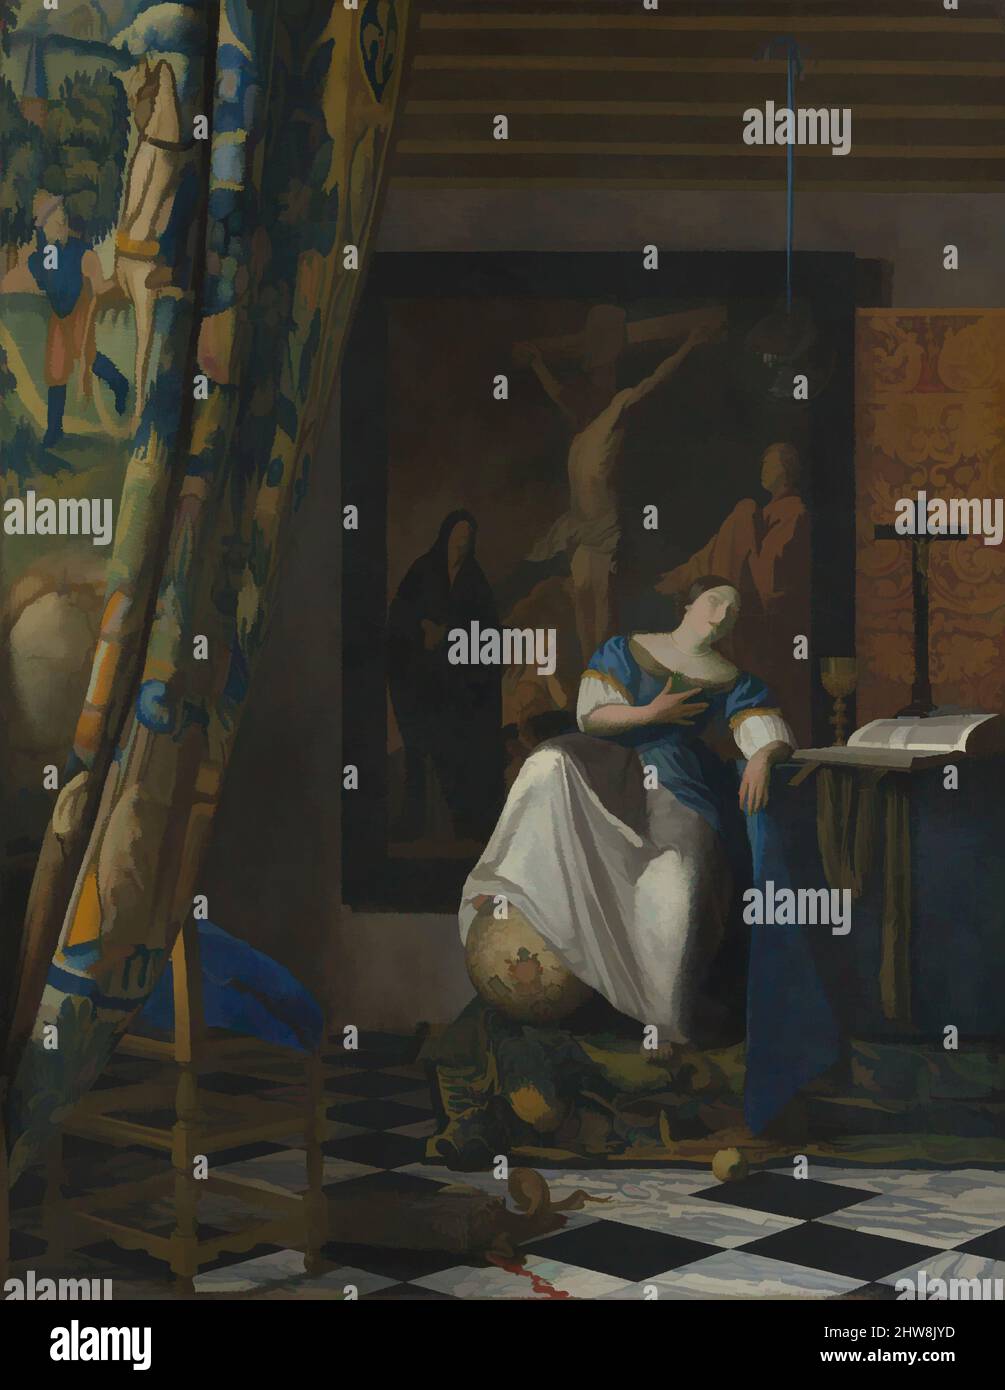 Art inspired by Allegory of the Catholic Faith, ca. 1670–72, Oil on canvas, 45 x 35 in. (114.3 x 88.9 cm), Paintings, Johannes Vermeer (Dutch, Delft 1632–1675 Delft), In this atypical painting the artist employed a more abstractive style to suit the intellectual subject. The emotive, Classic works modernized by Artotop with a splash of modernity. Shapes, color and value, eye-catching visual impact on art. Emotions through freedom of artworks in a contemporary way. A timeless message pursuing a wildly creative new direction. Artists turning to the digital medium and creating the Artotop NFT Stock Photo